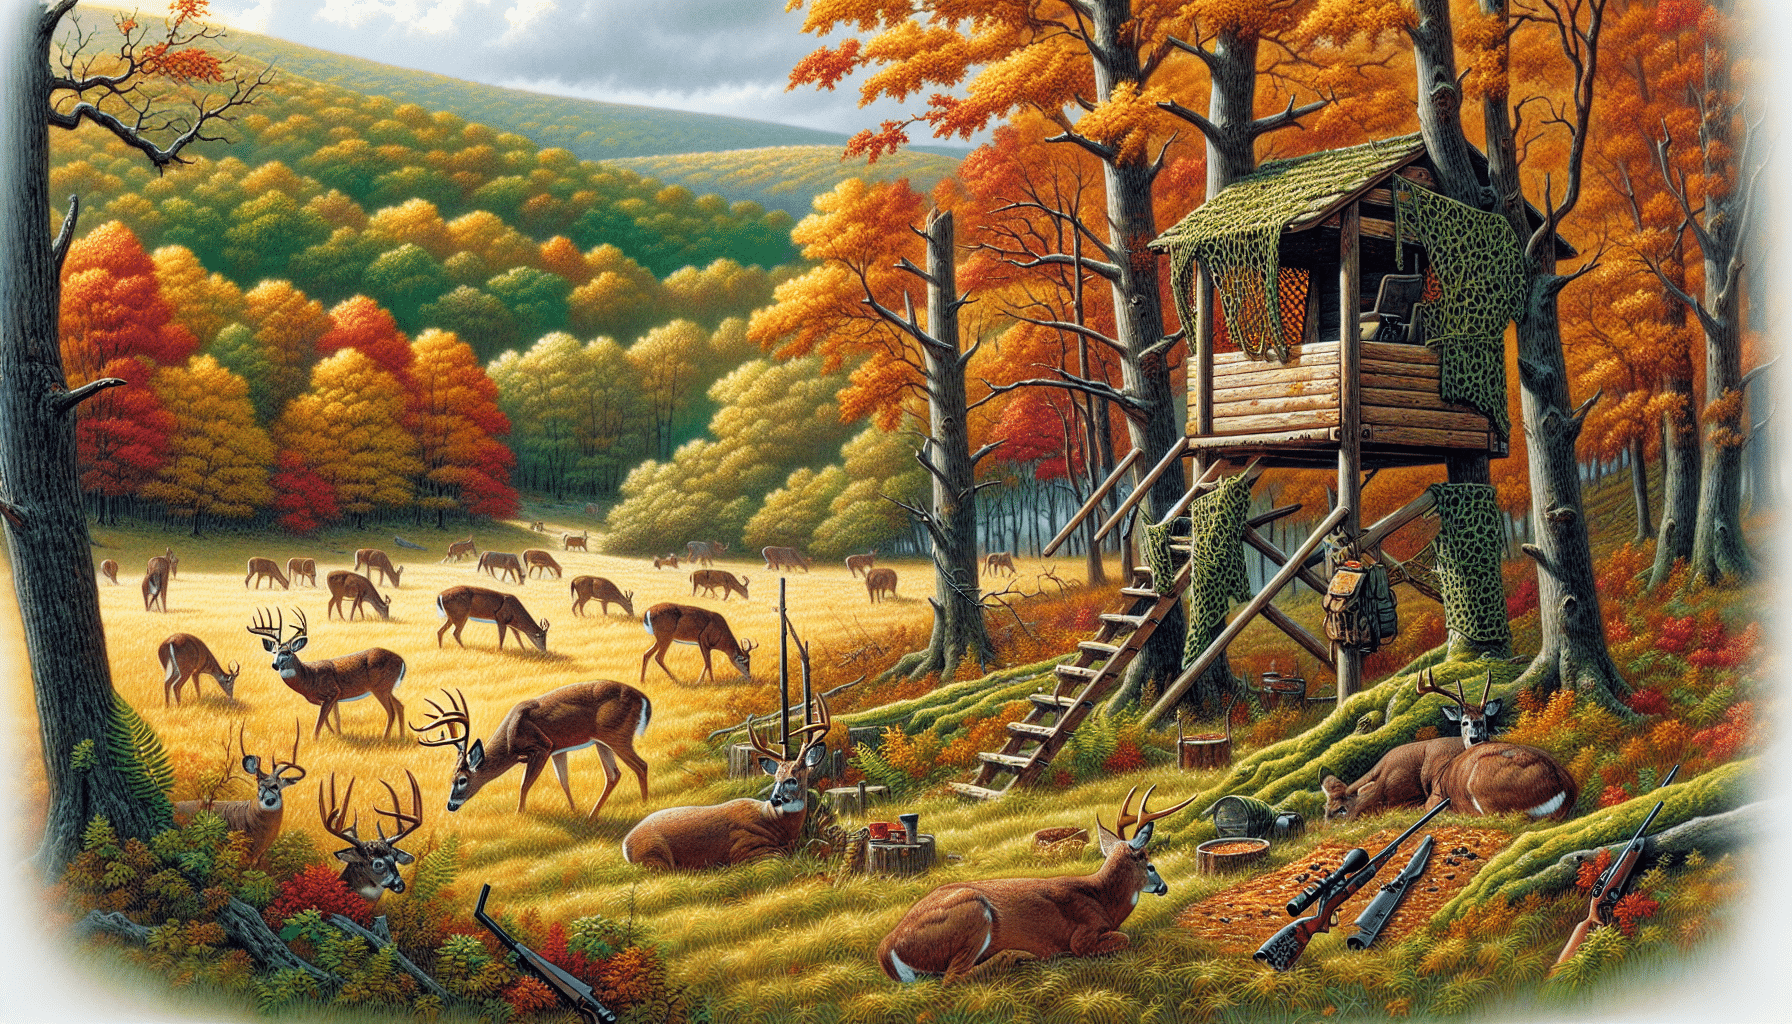 Illustrate an idyllic Pennsylvanian woodland during fall, with vivid foliage everywhere, and a herd of deer grazing peacefully in the meadow. Also, demonstrate a few strategies commonly employed in deer hunting -- prominently show an elevated deer stand positioned strategically with a good vantage point and a camouflage netting near a trail frequented by deer. Include the details of a carefully laid bait station with food and markings that attract deer. Remember, no text or brand names are to be included and no people in the scene.